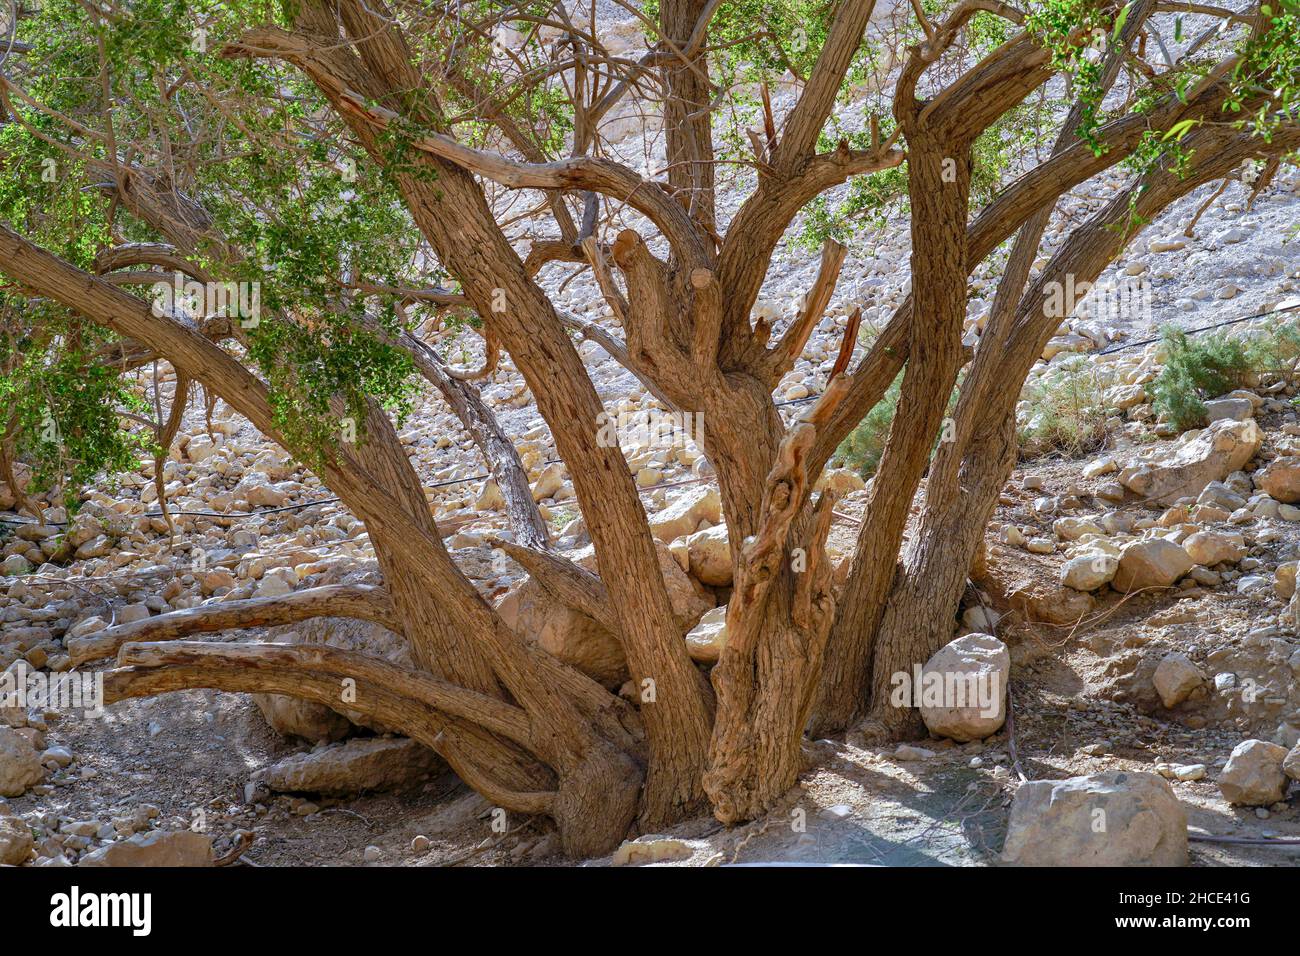 Lone Acacia Tree in an arid desert. Photographed in The Dead Sea, Israel Stock Photo